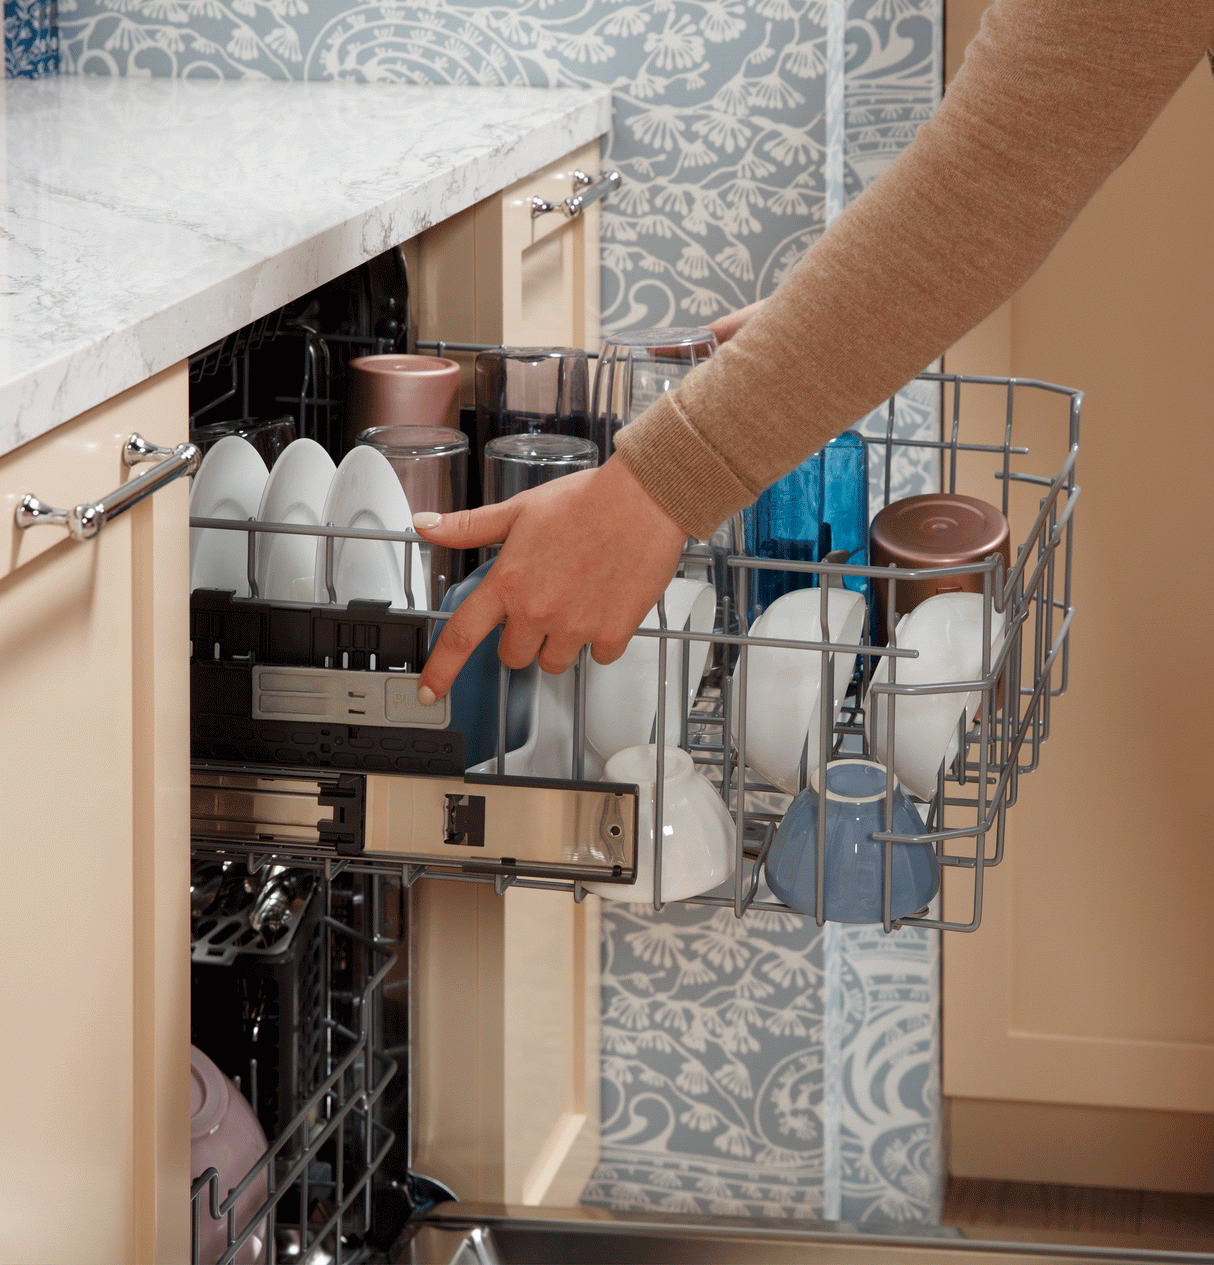 GE(R) ENERGY STAR(R) Top Control with Stainless Steel Interior Dishwasher with Sanitize Cycle - (GDT670SYVFS)